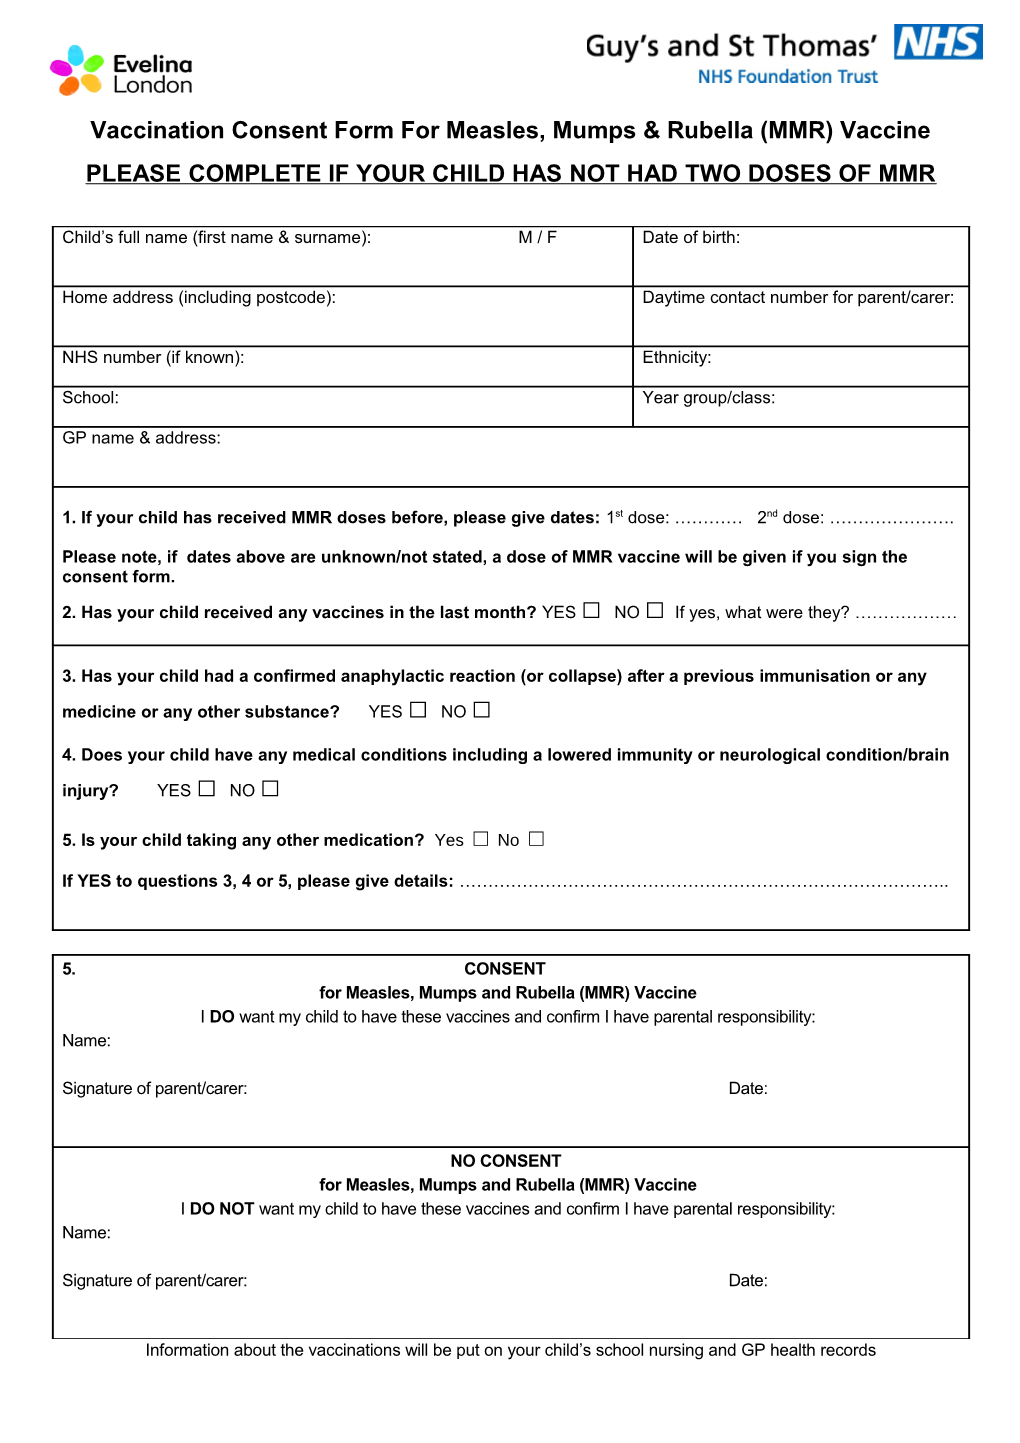 Vaccination Consent Form for Measles, Mumps & Rubella (MMR) Vaccine